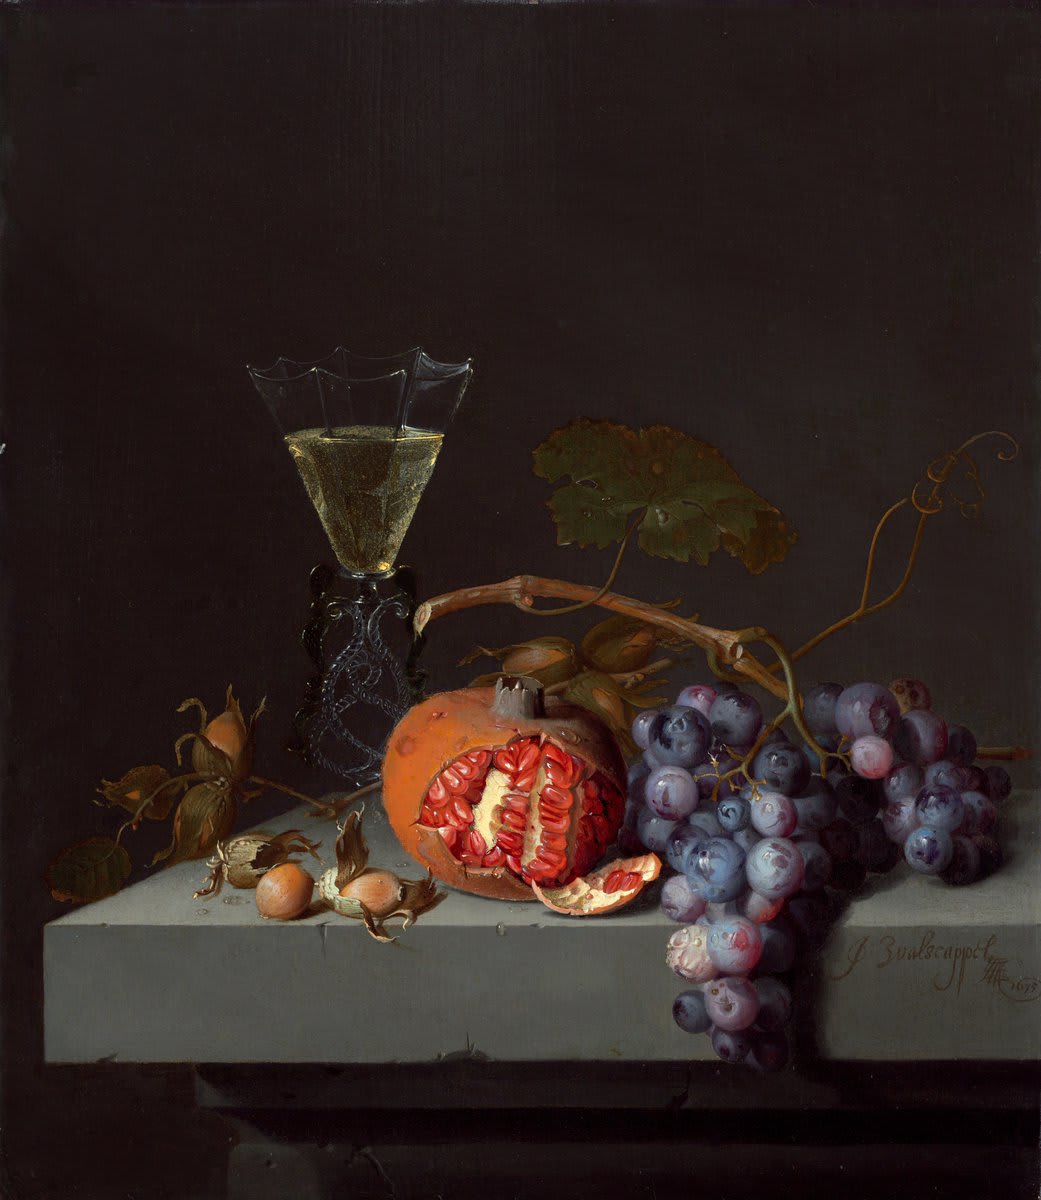 Close your eyes, imagine filling your plate, and asking for seconds. (chef’s kiss) Jacob van Walscapelle, “Still Life with Fruit,” 1675, oil on panel painting